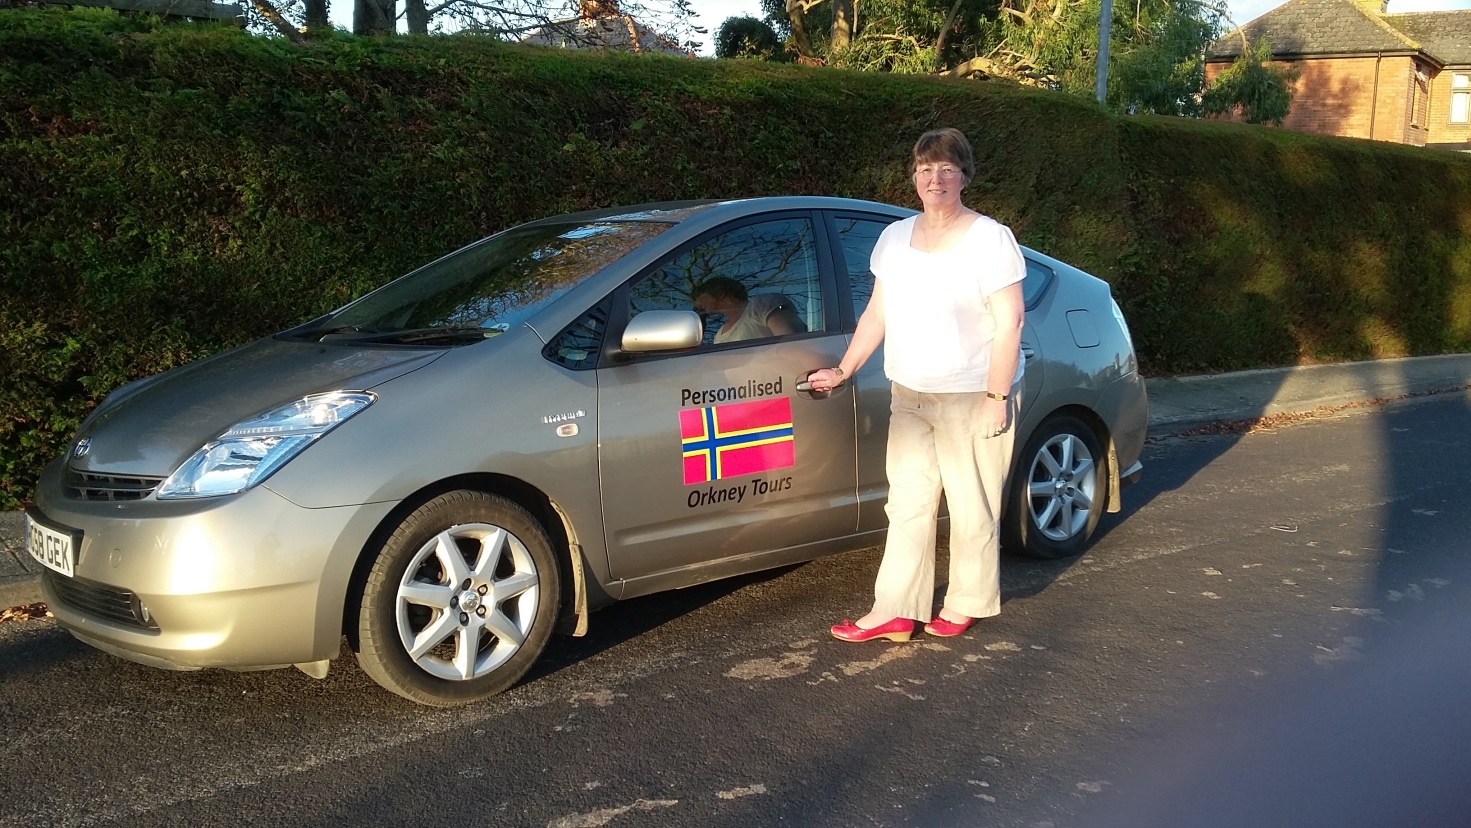 Jo Jones, Orkney Islands tour guide, with her Driver Guiding Vehicle – a Toyota Prius T4 Spirit Hybrid licensed to take up to 4 passengers. Local experts travel tips on Orkneyology.com